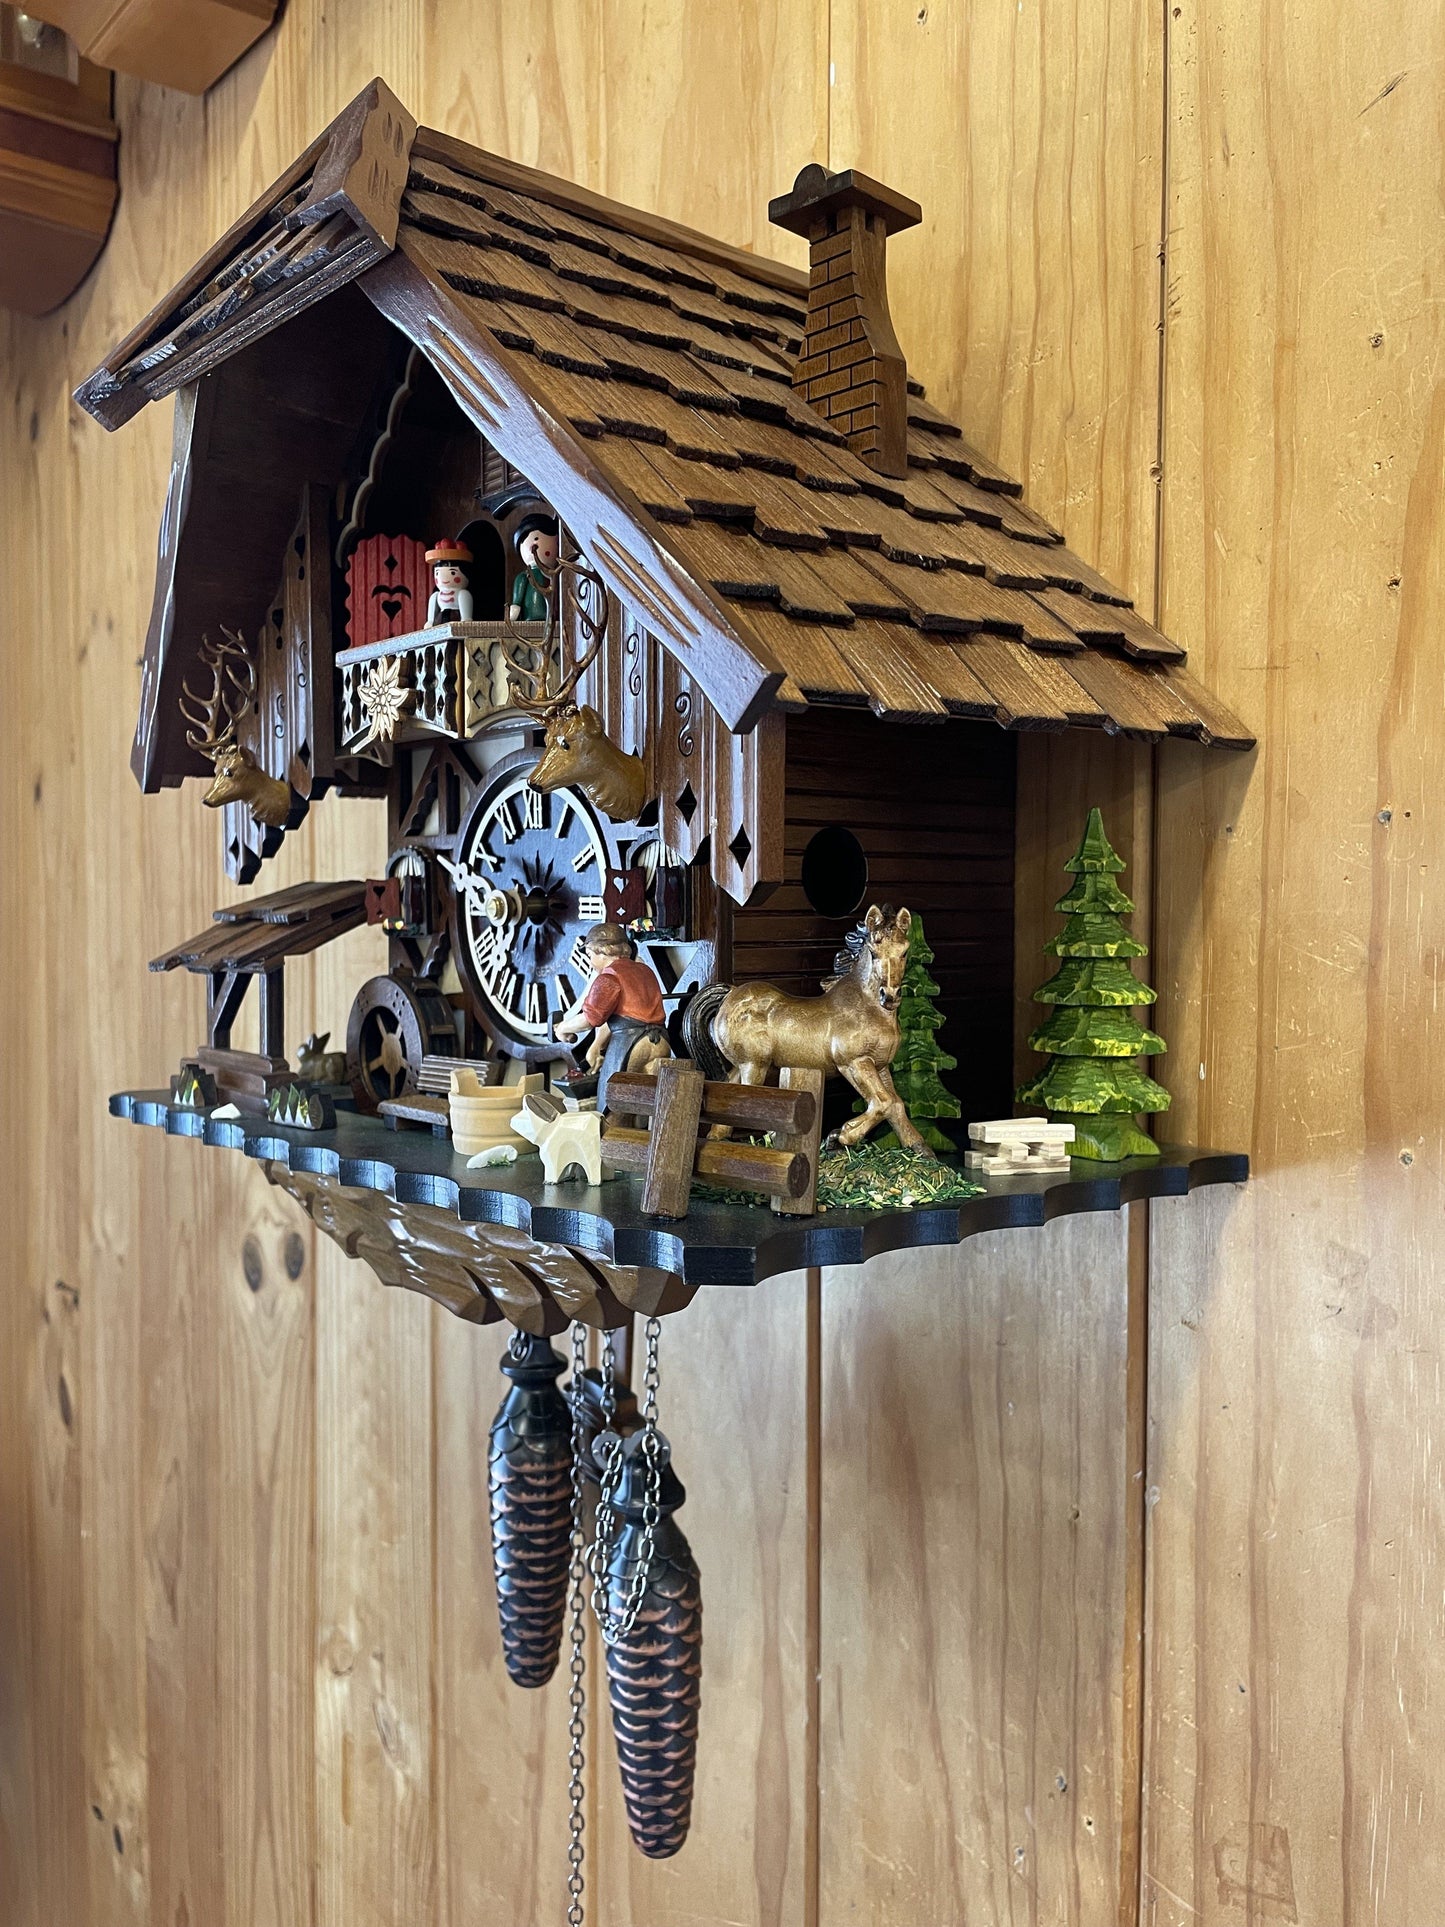 Horse And Farrier Musical Cuckoo Clock. Made By Engstler From The Black Forest (Free delivery across Australia) Cuckoo Clock [clocktyme.com] 